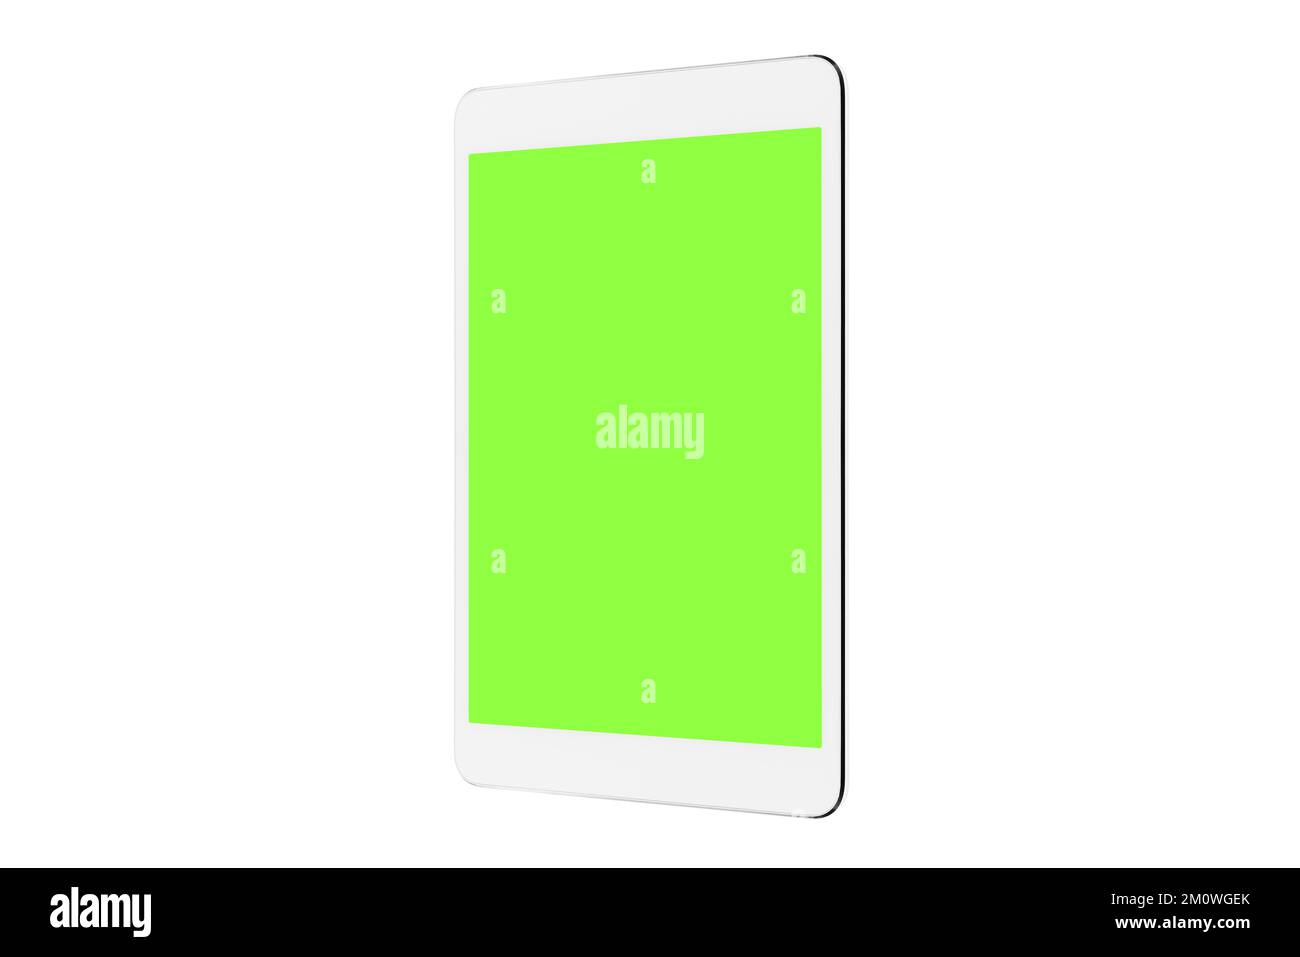 Digital Tablet isolated Mockup white background, New Modern Black Frameless Tablet Blank With Chroma Key Screen Based on a high-quality Studio Shot Stock Photo